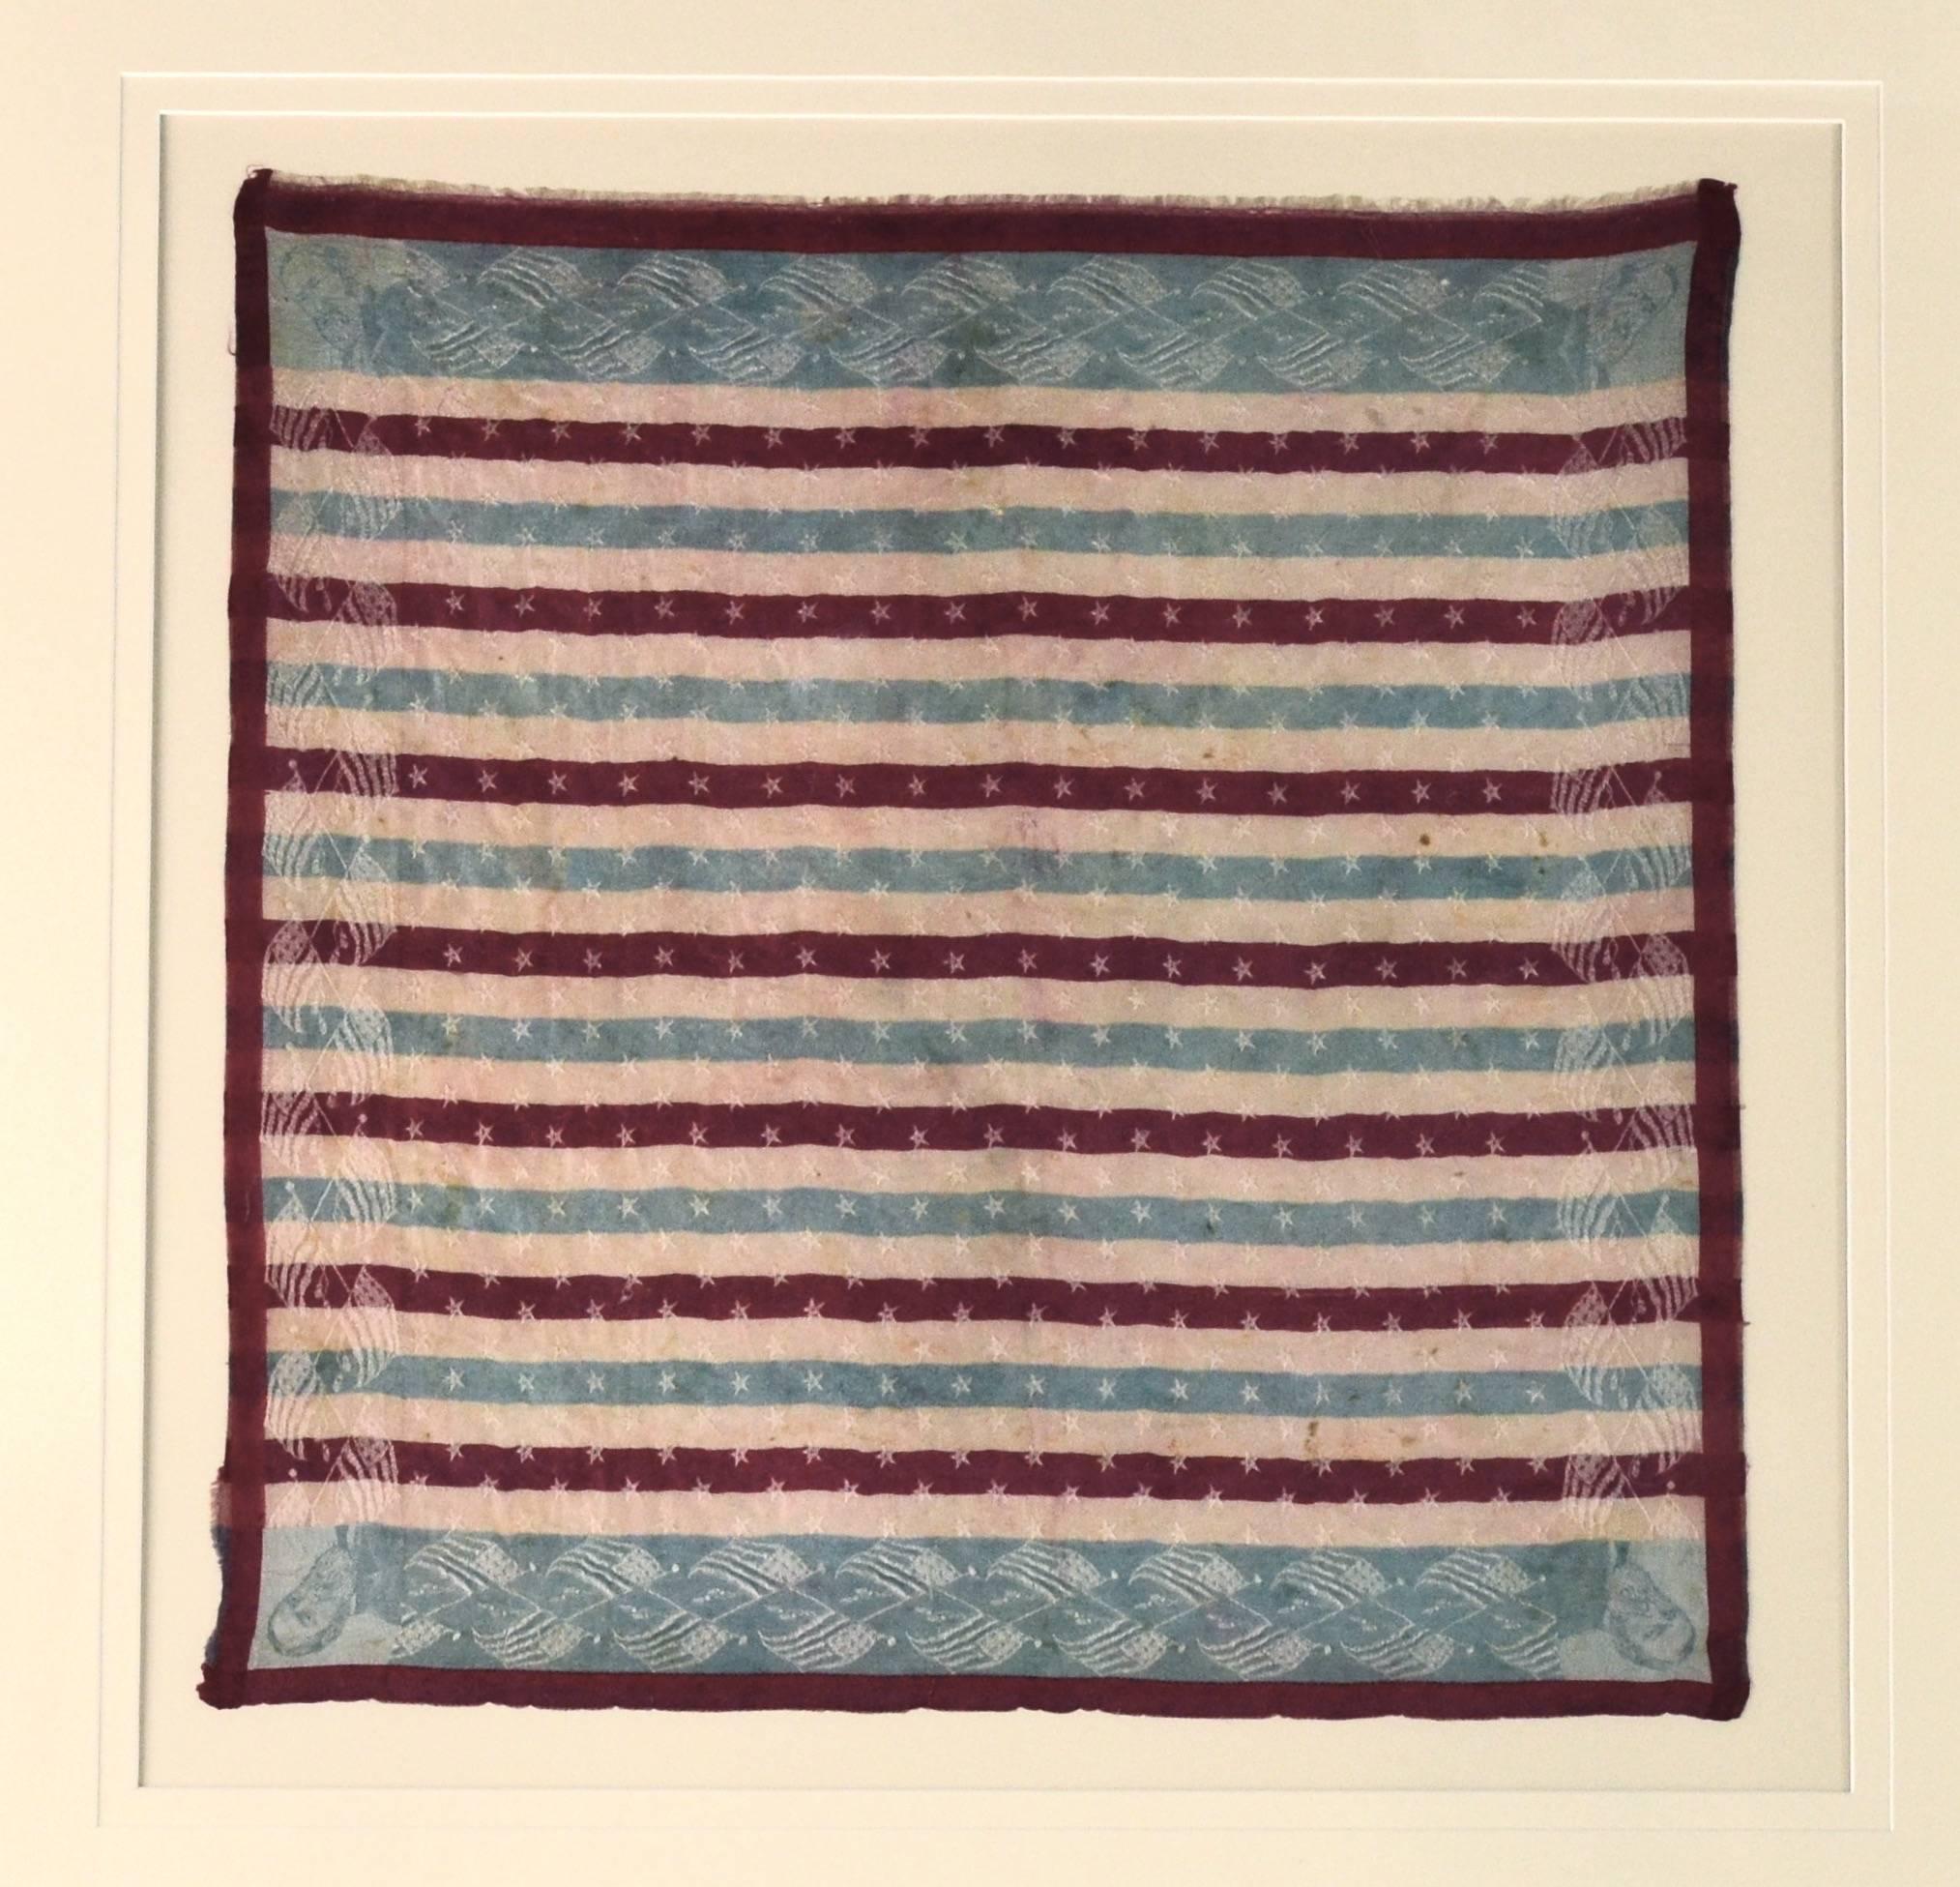 Antique 1889 Presidential Campaign Textile for Benjamin Harrison. See the intricate weaving of his image with flags throughout the beautiful textile. Called a 